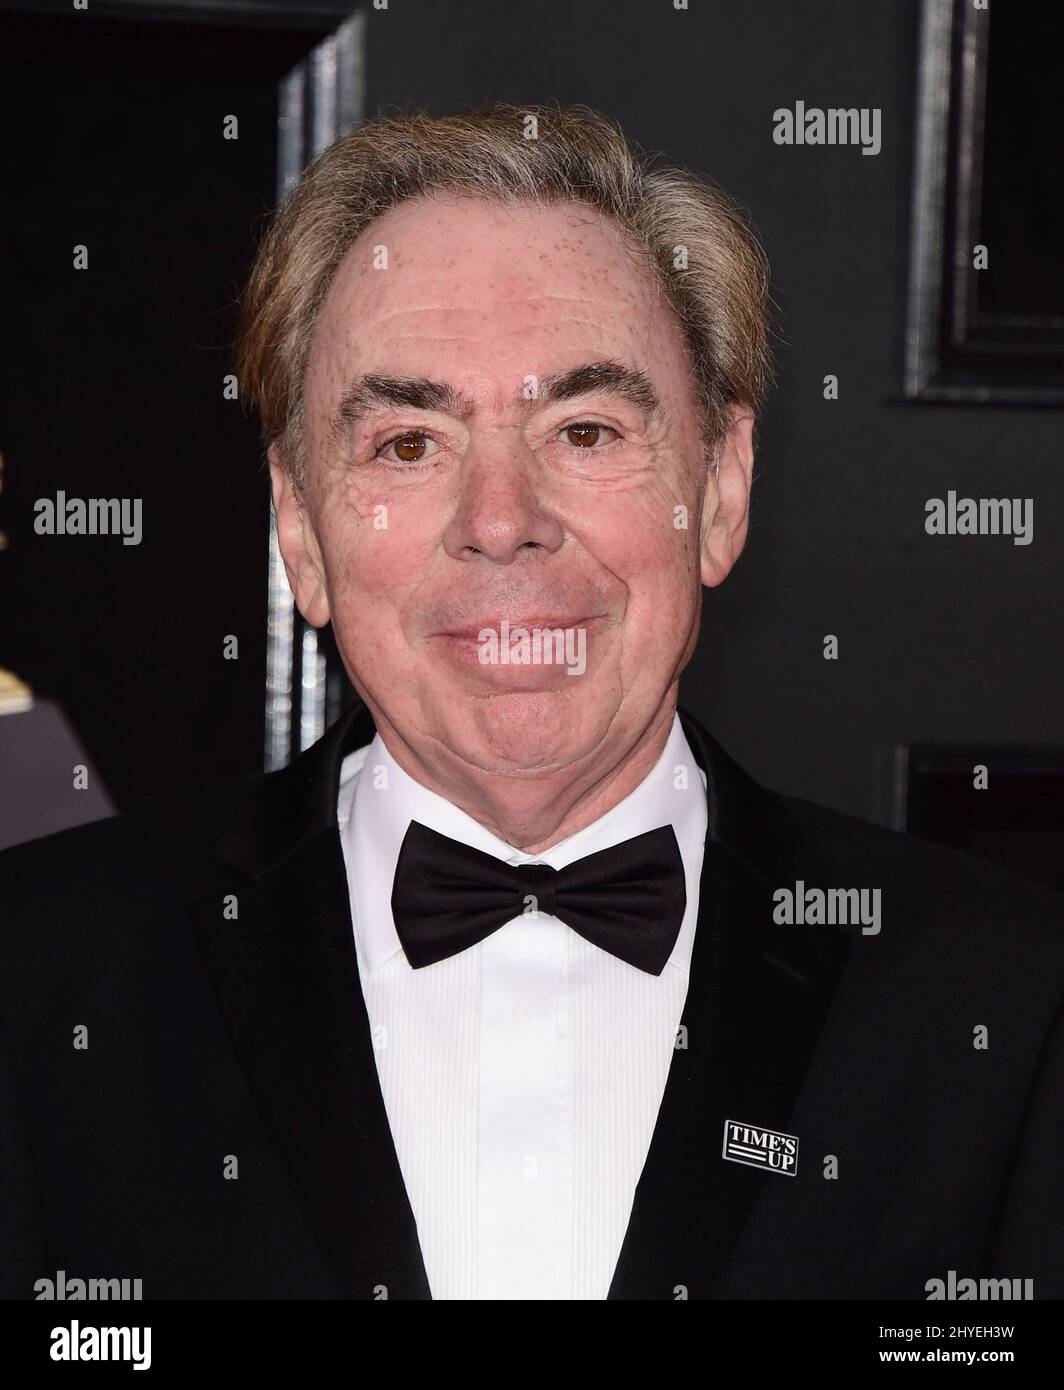 Andrew Lloyd Webber at the 60th Annual GRAMMY Awards held at Madison Square Garden on January 28, 2018 in New York, NY Stock Photo